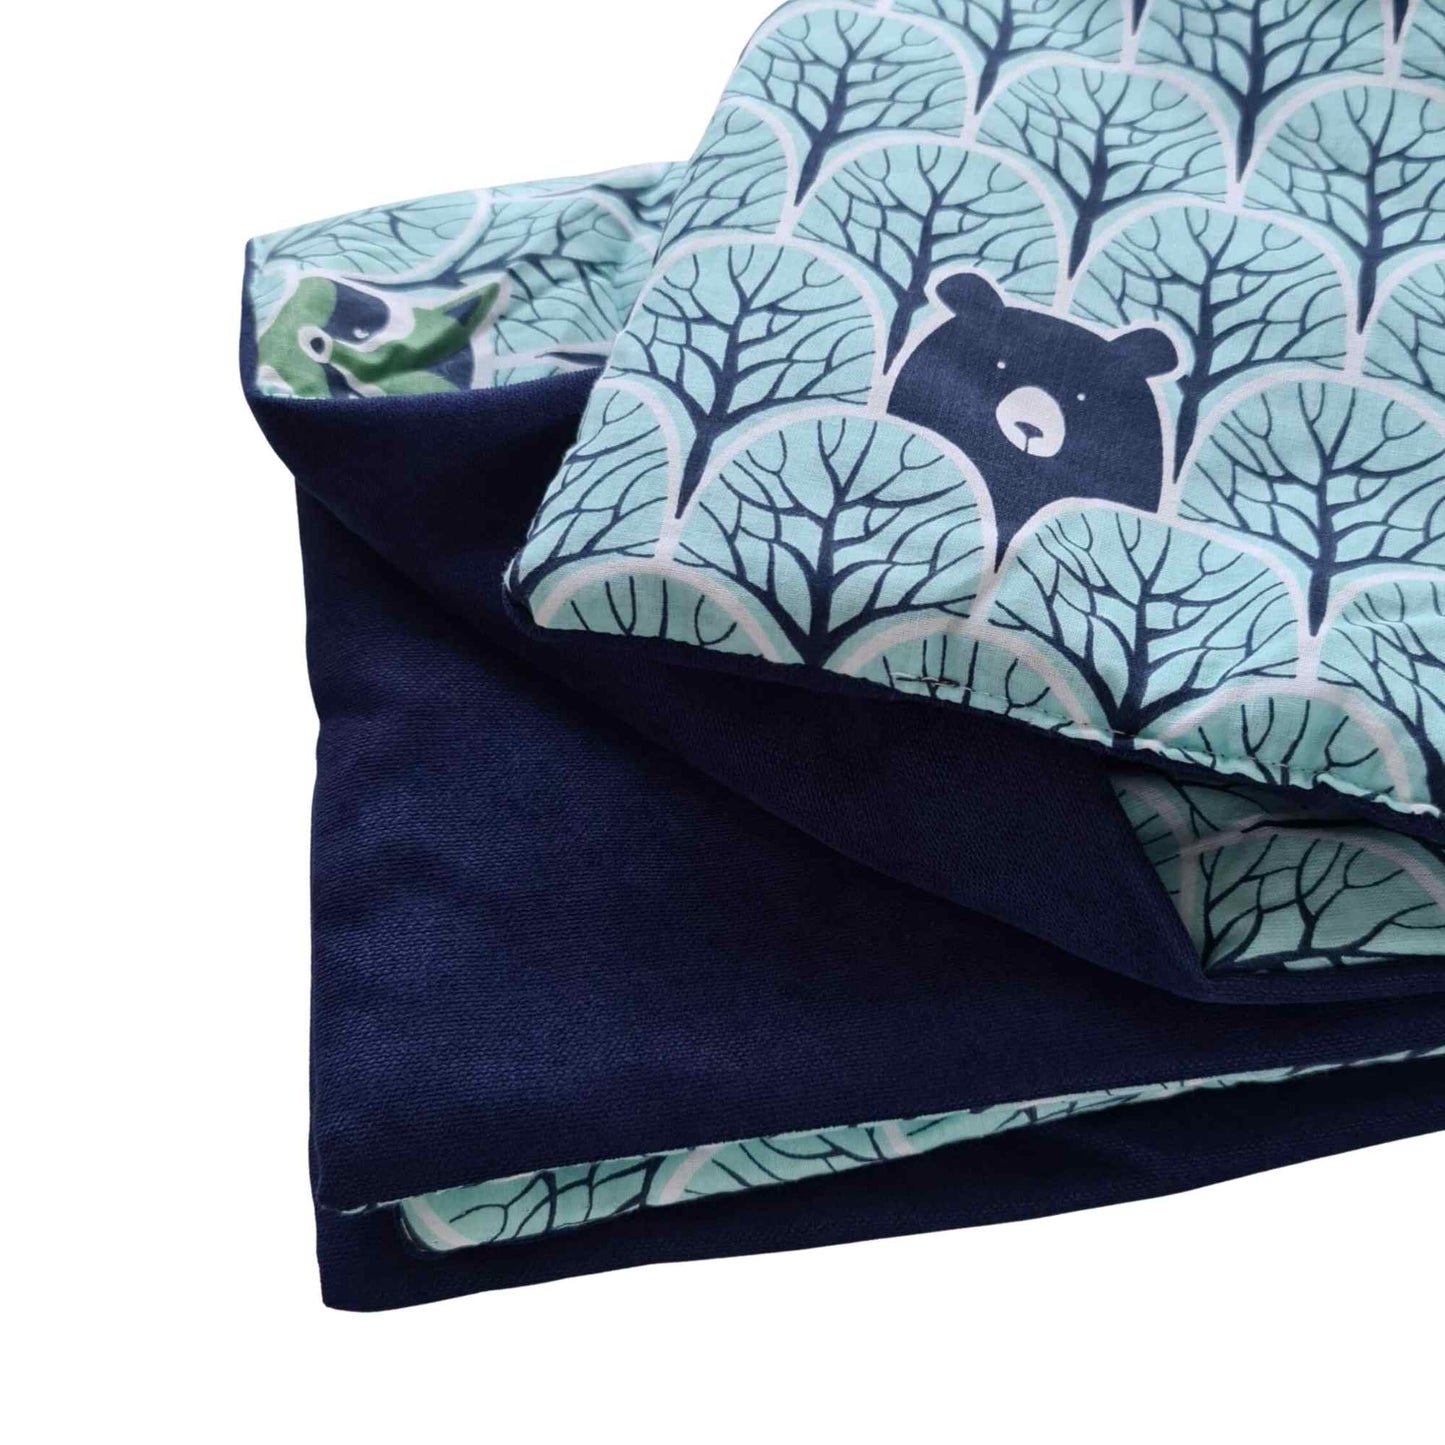 Blanket & Pillow - Forest Friends- Sizes S